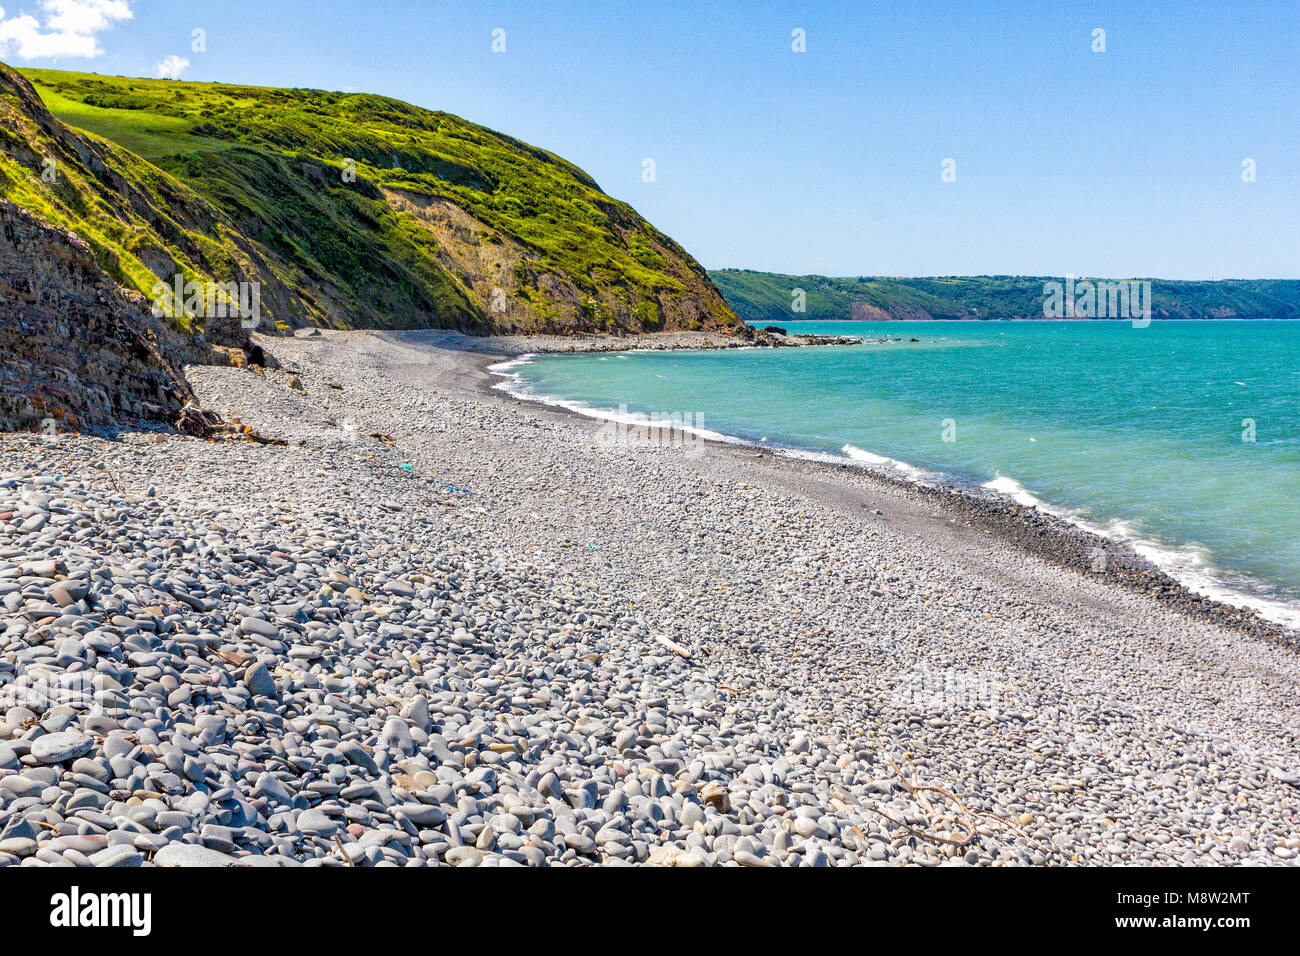 Greencliff Beach - Pebble View at Mid Tide, Looking South West towards Bucks Mills (Landscape view), Greencliff Beach, near Bideford, Devon, UK. Stock Photo